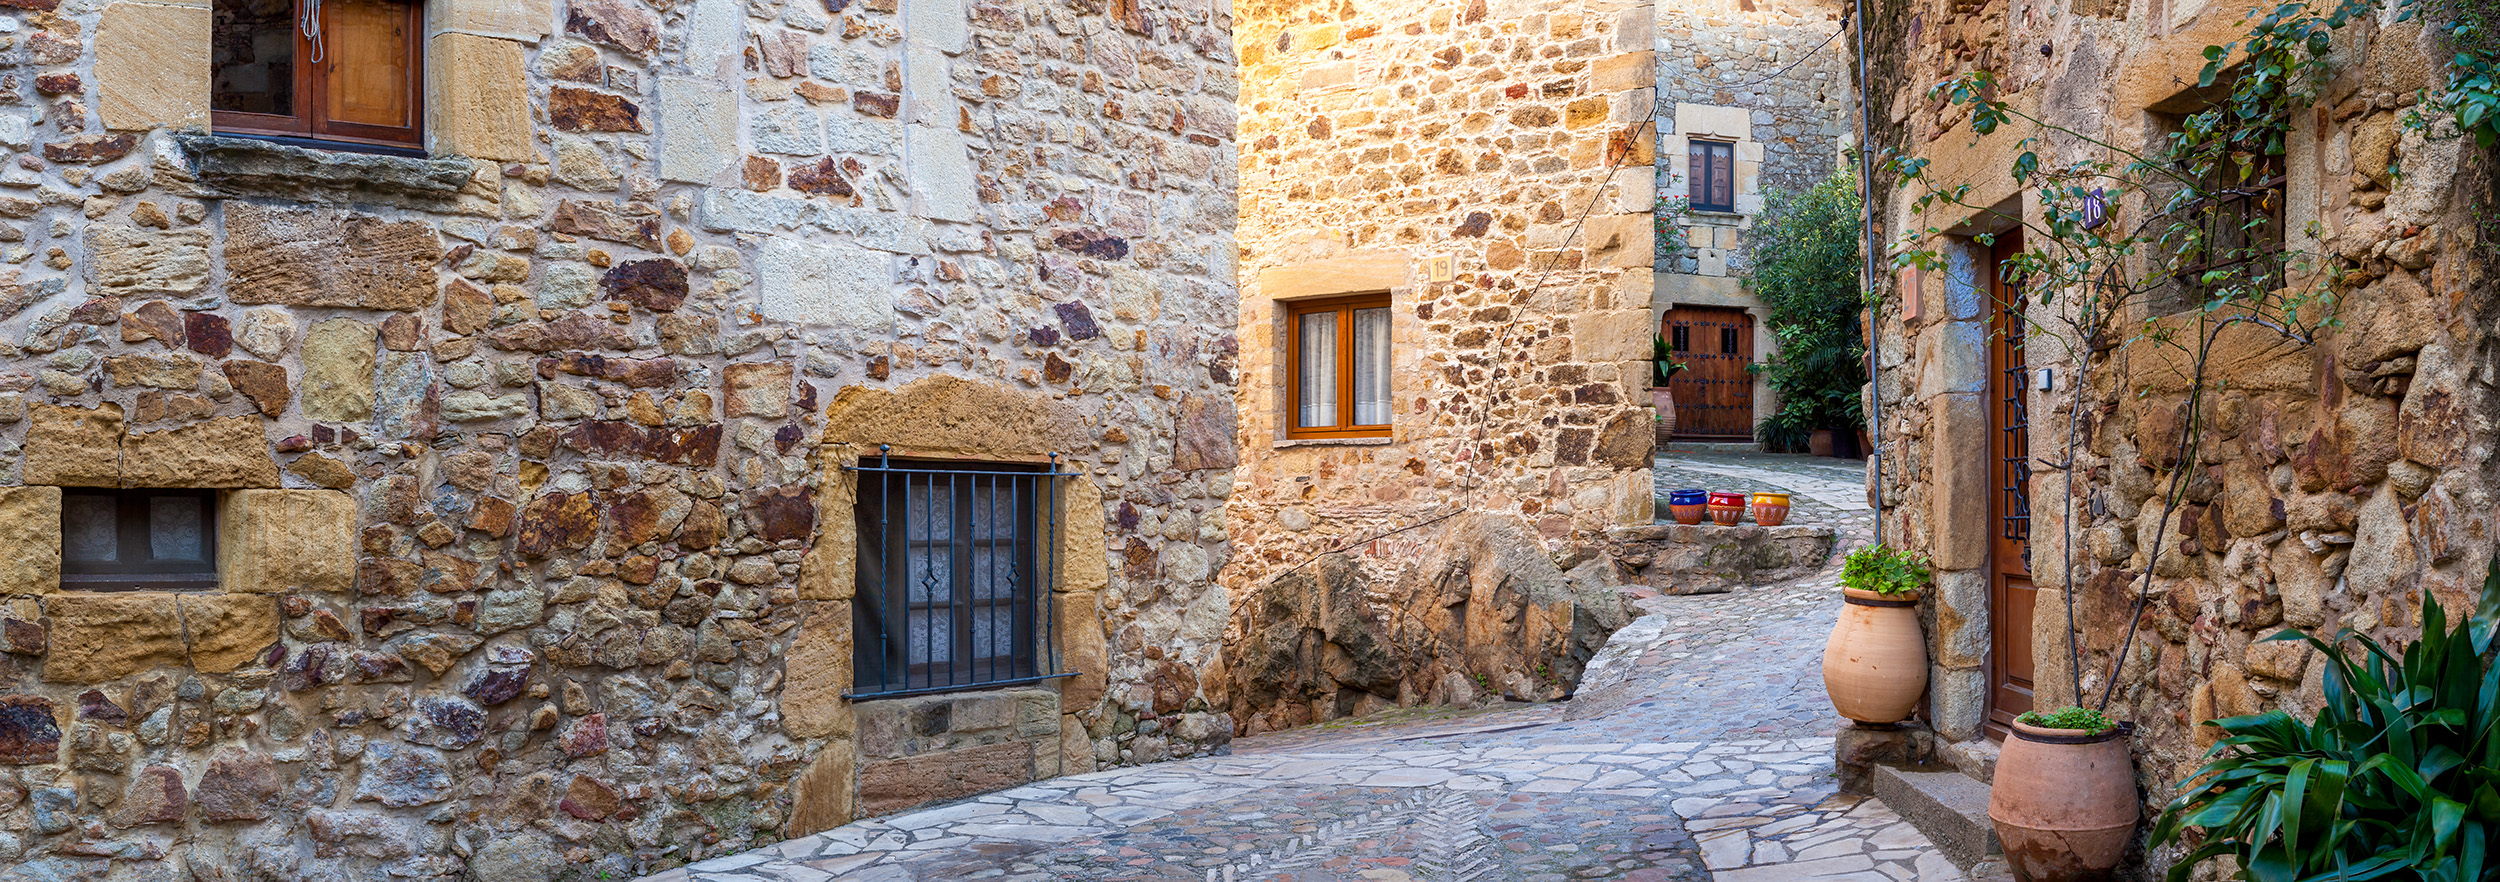 In Pals, Spain, I ventured to capture the essence of this picturesque village. This panoramic mosaic reveals a charming cross...